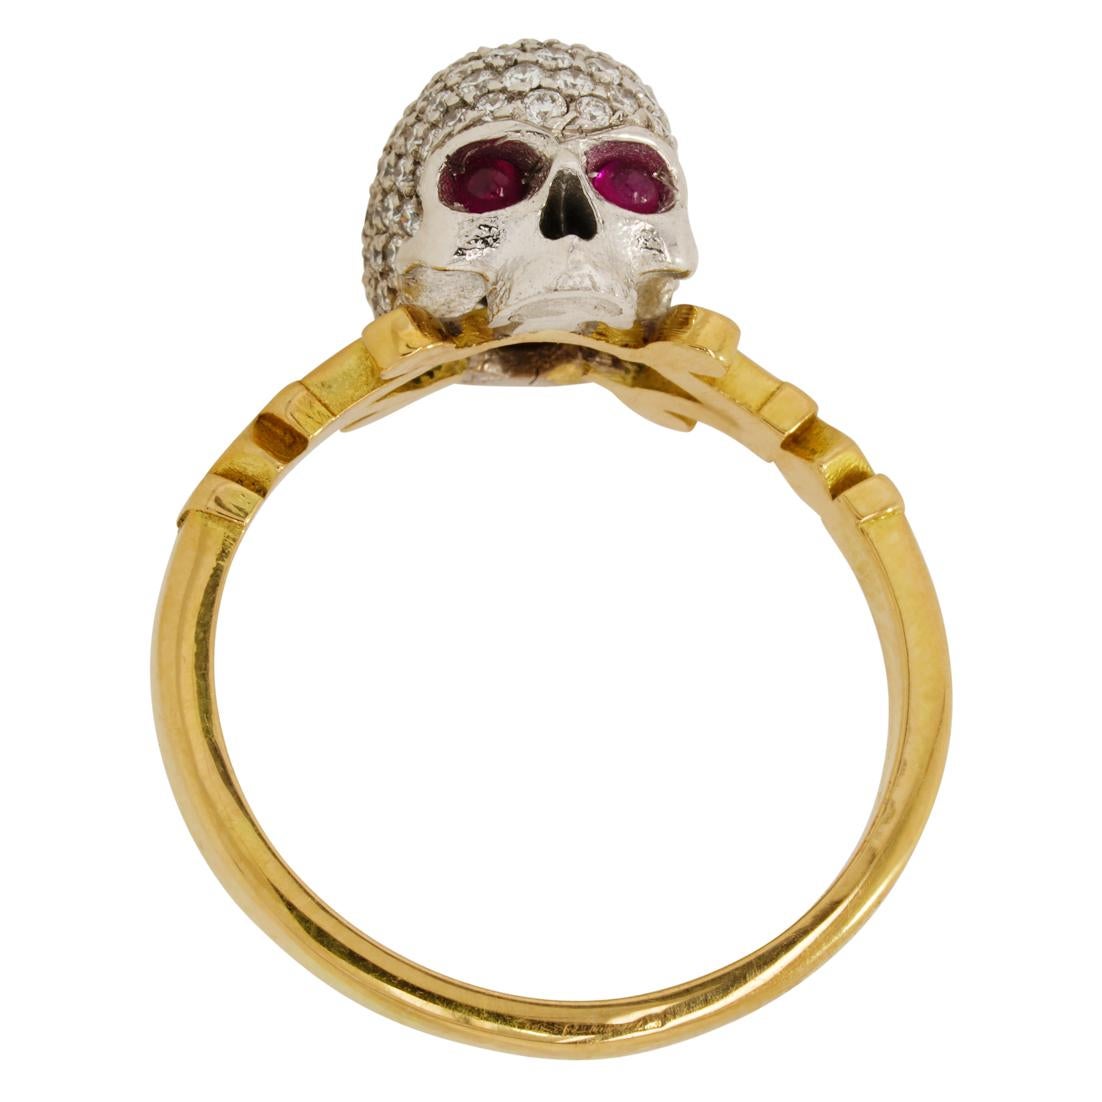 Catacomb Saint Diamond Encrusted Skull Ring in 18kt Gold with Diamonds & Rubies For Sale 8